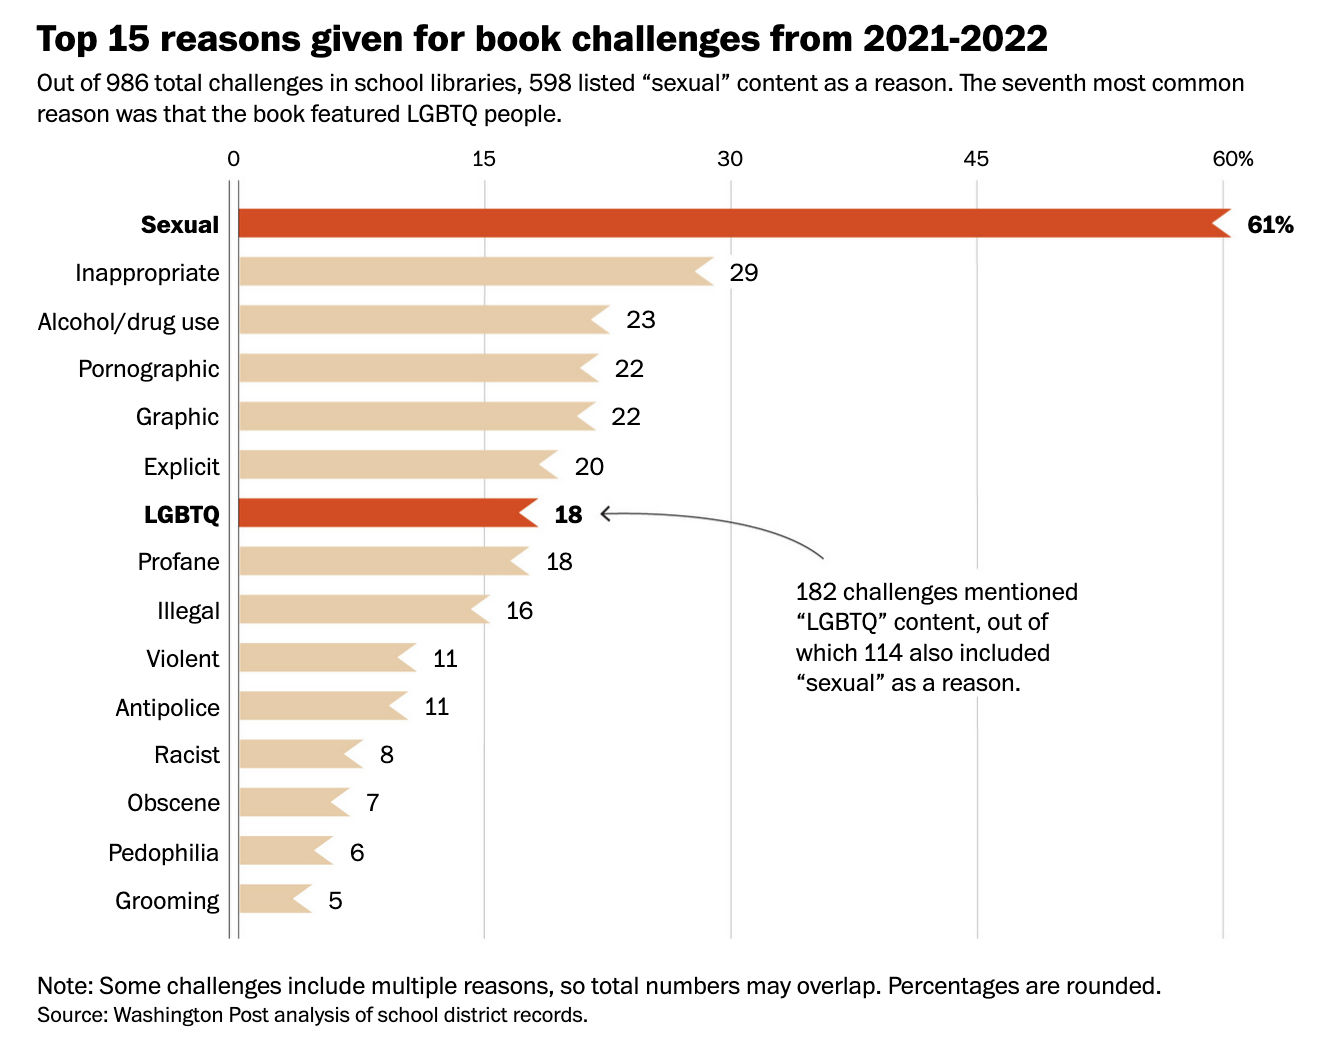 Poll by the Washington Post of the top 15 reasons given for book challenges.